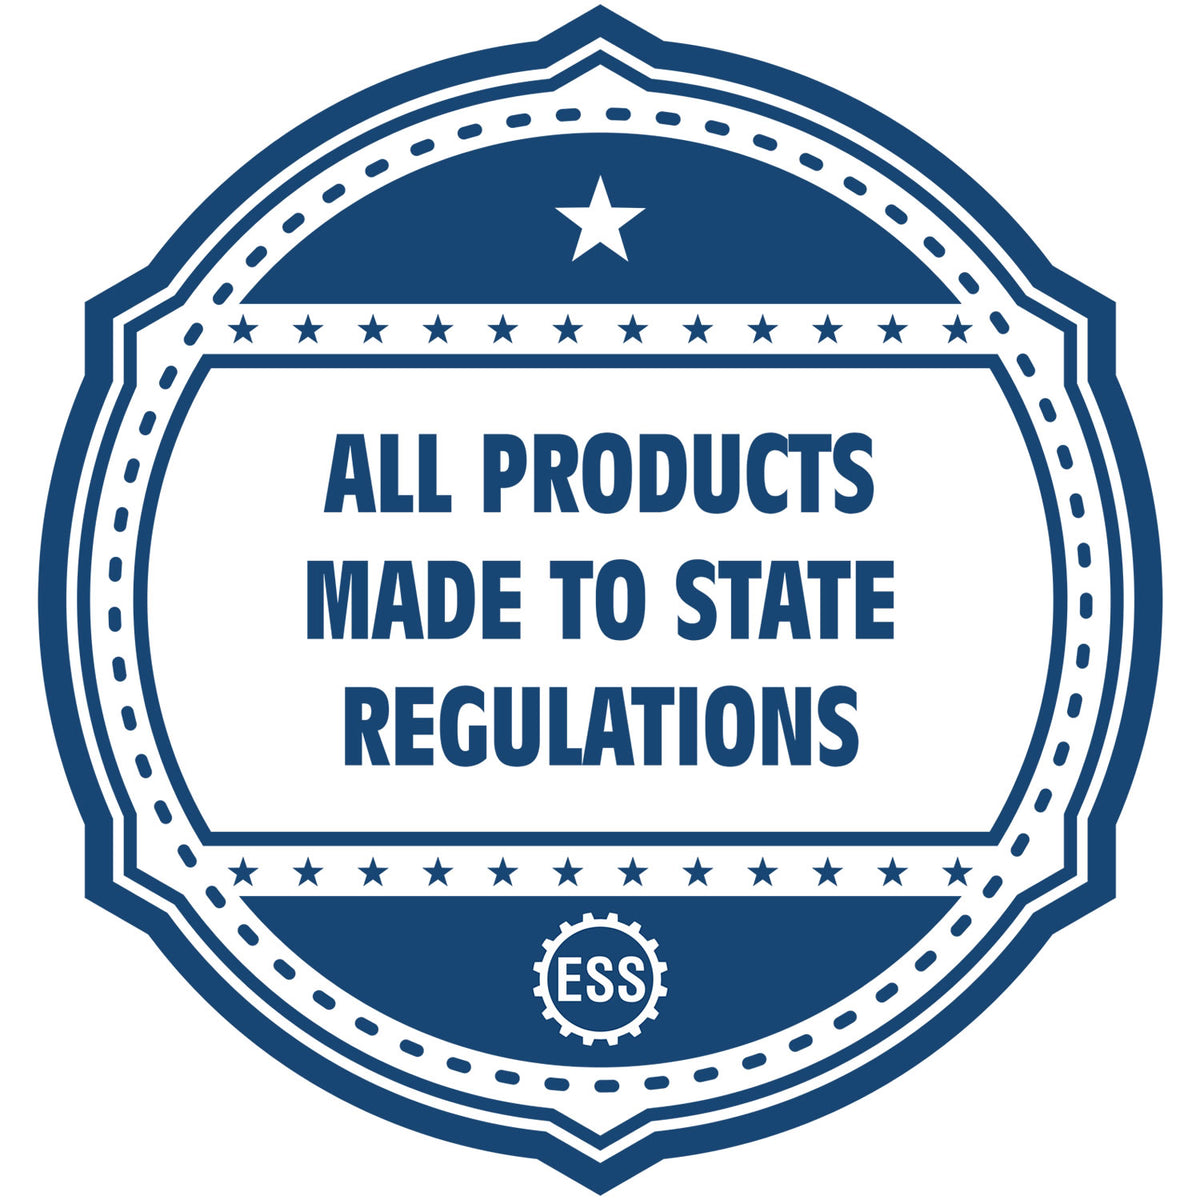 An icon or badge element for the MaxLight Premium Pre-Inked Alabama State Seal Notarial Stamp showing that this product is made in compliance with state regulations.